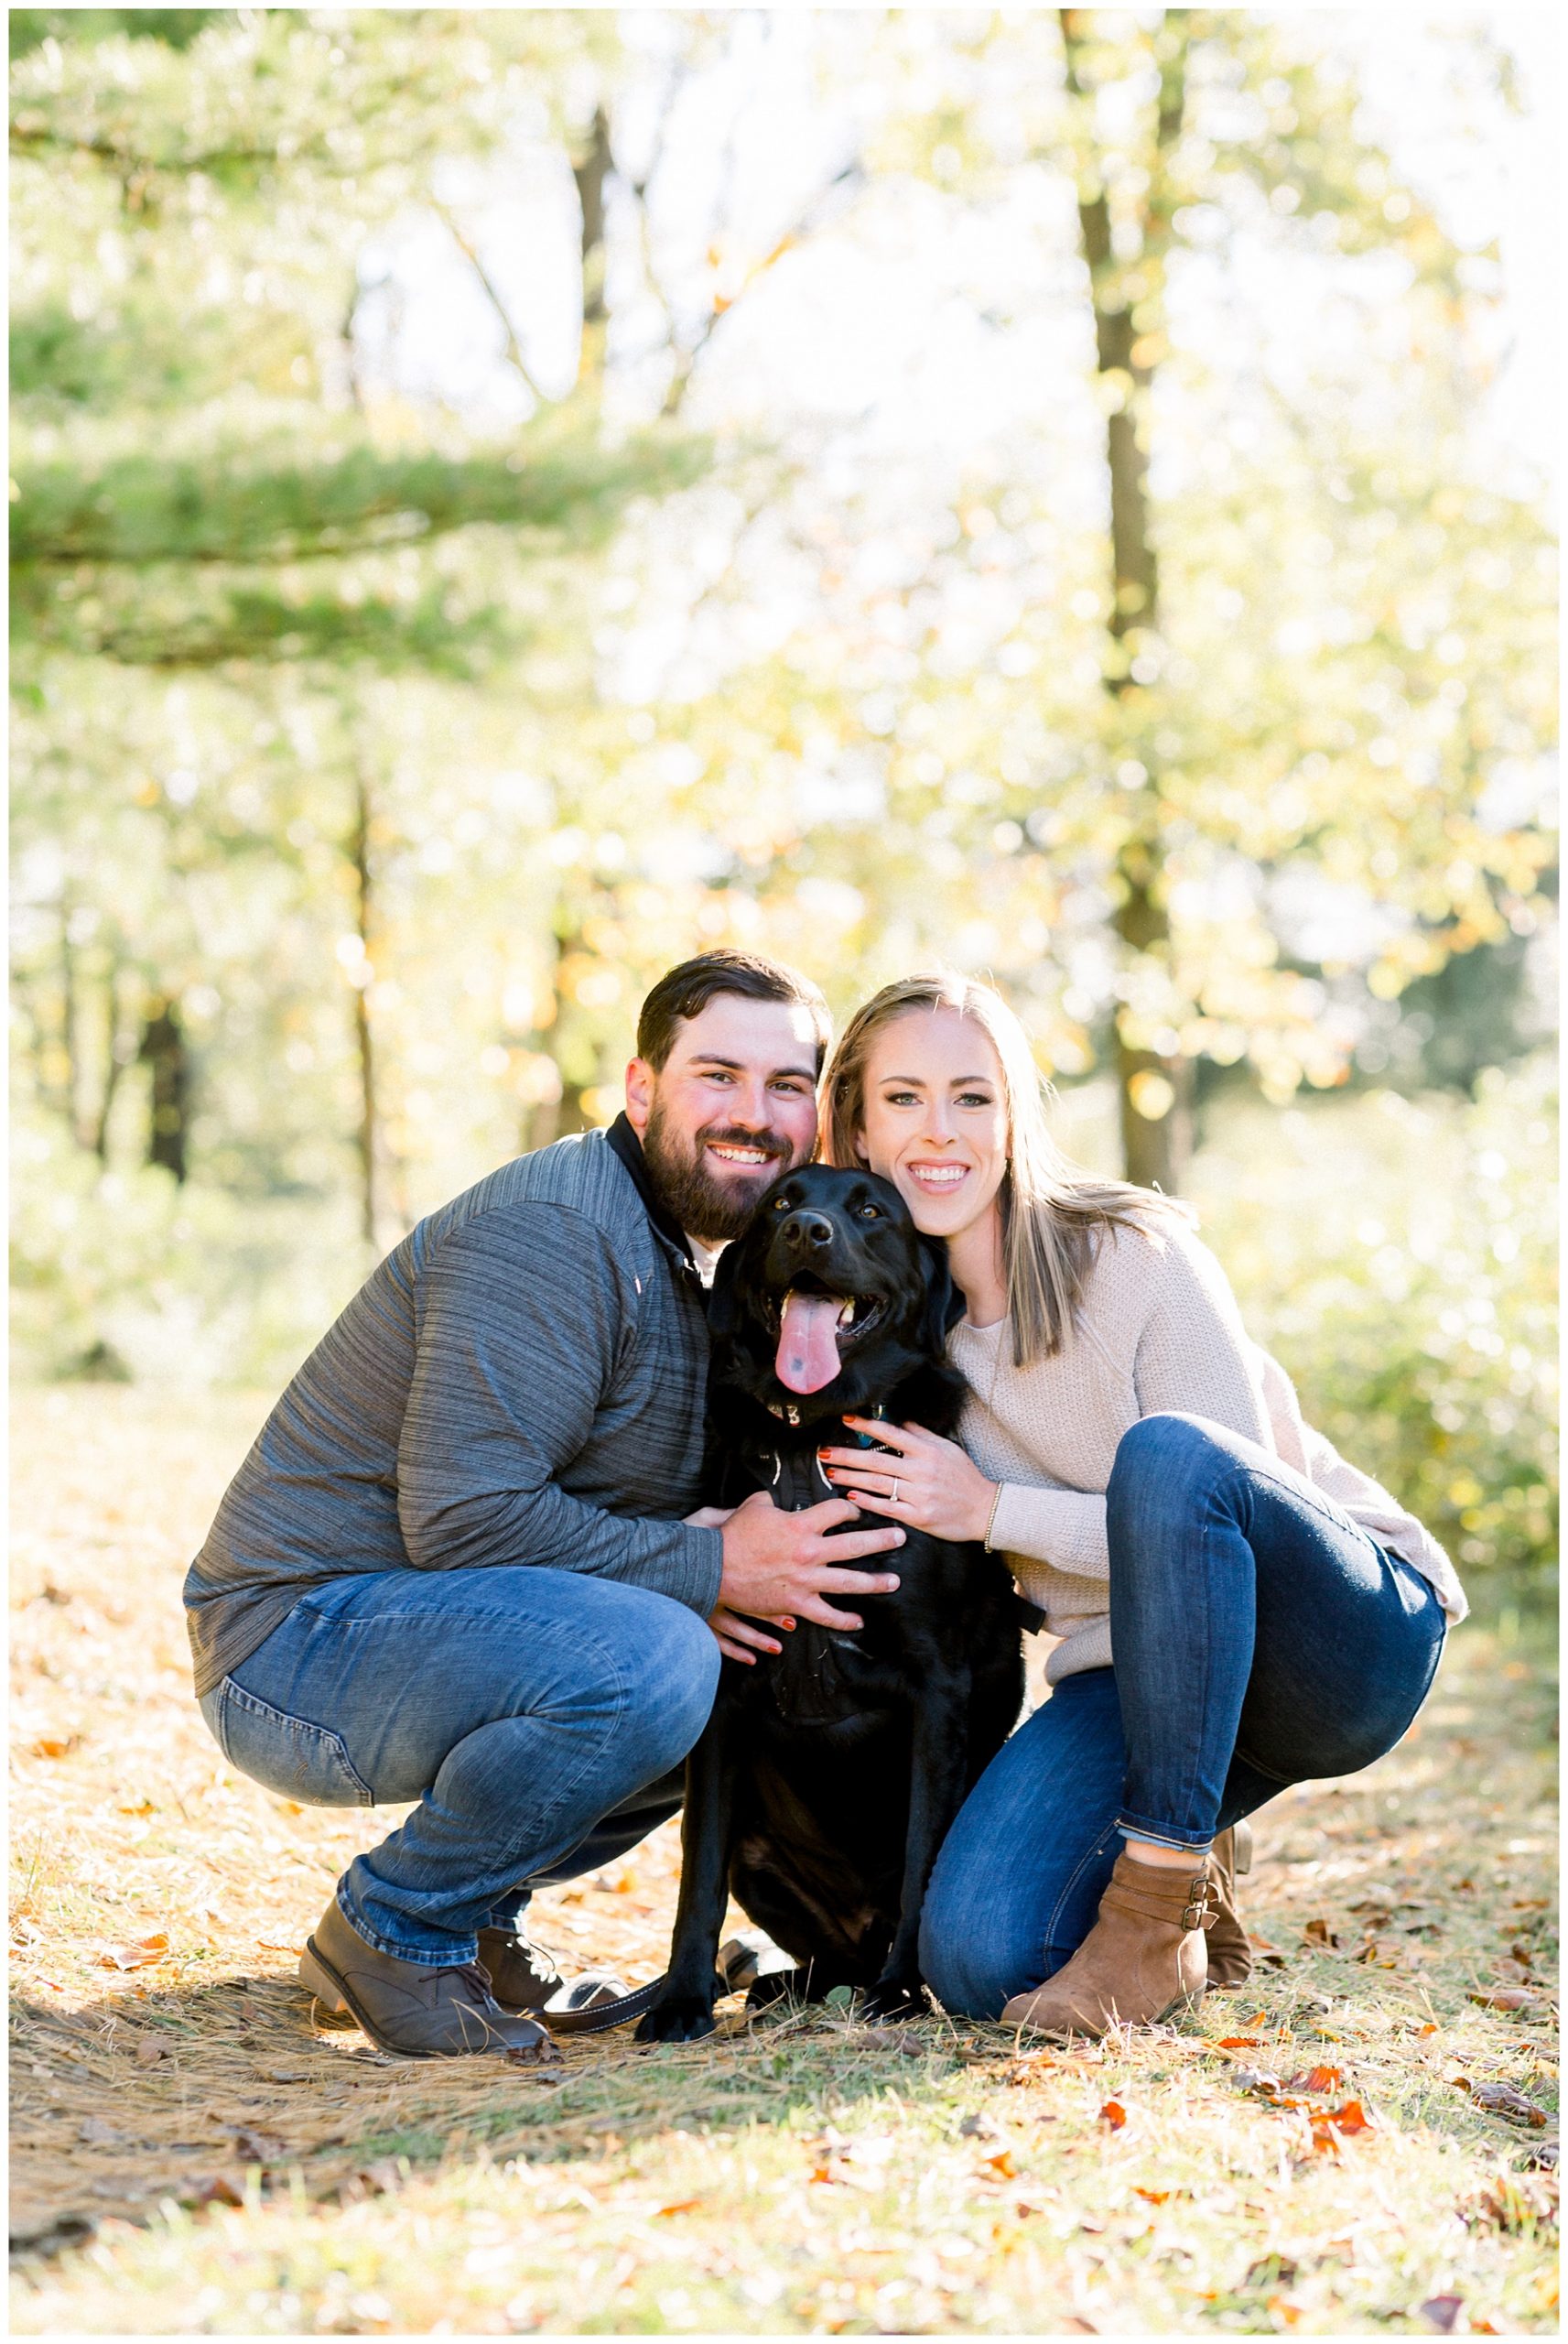 Hoover Reservoir Park Engagement Session with dog in Columbus Ohio